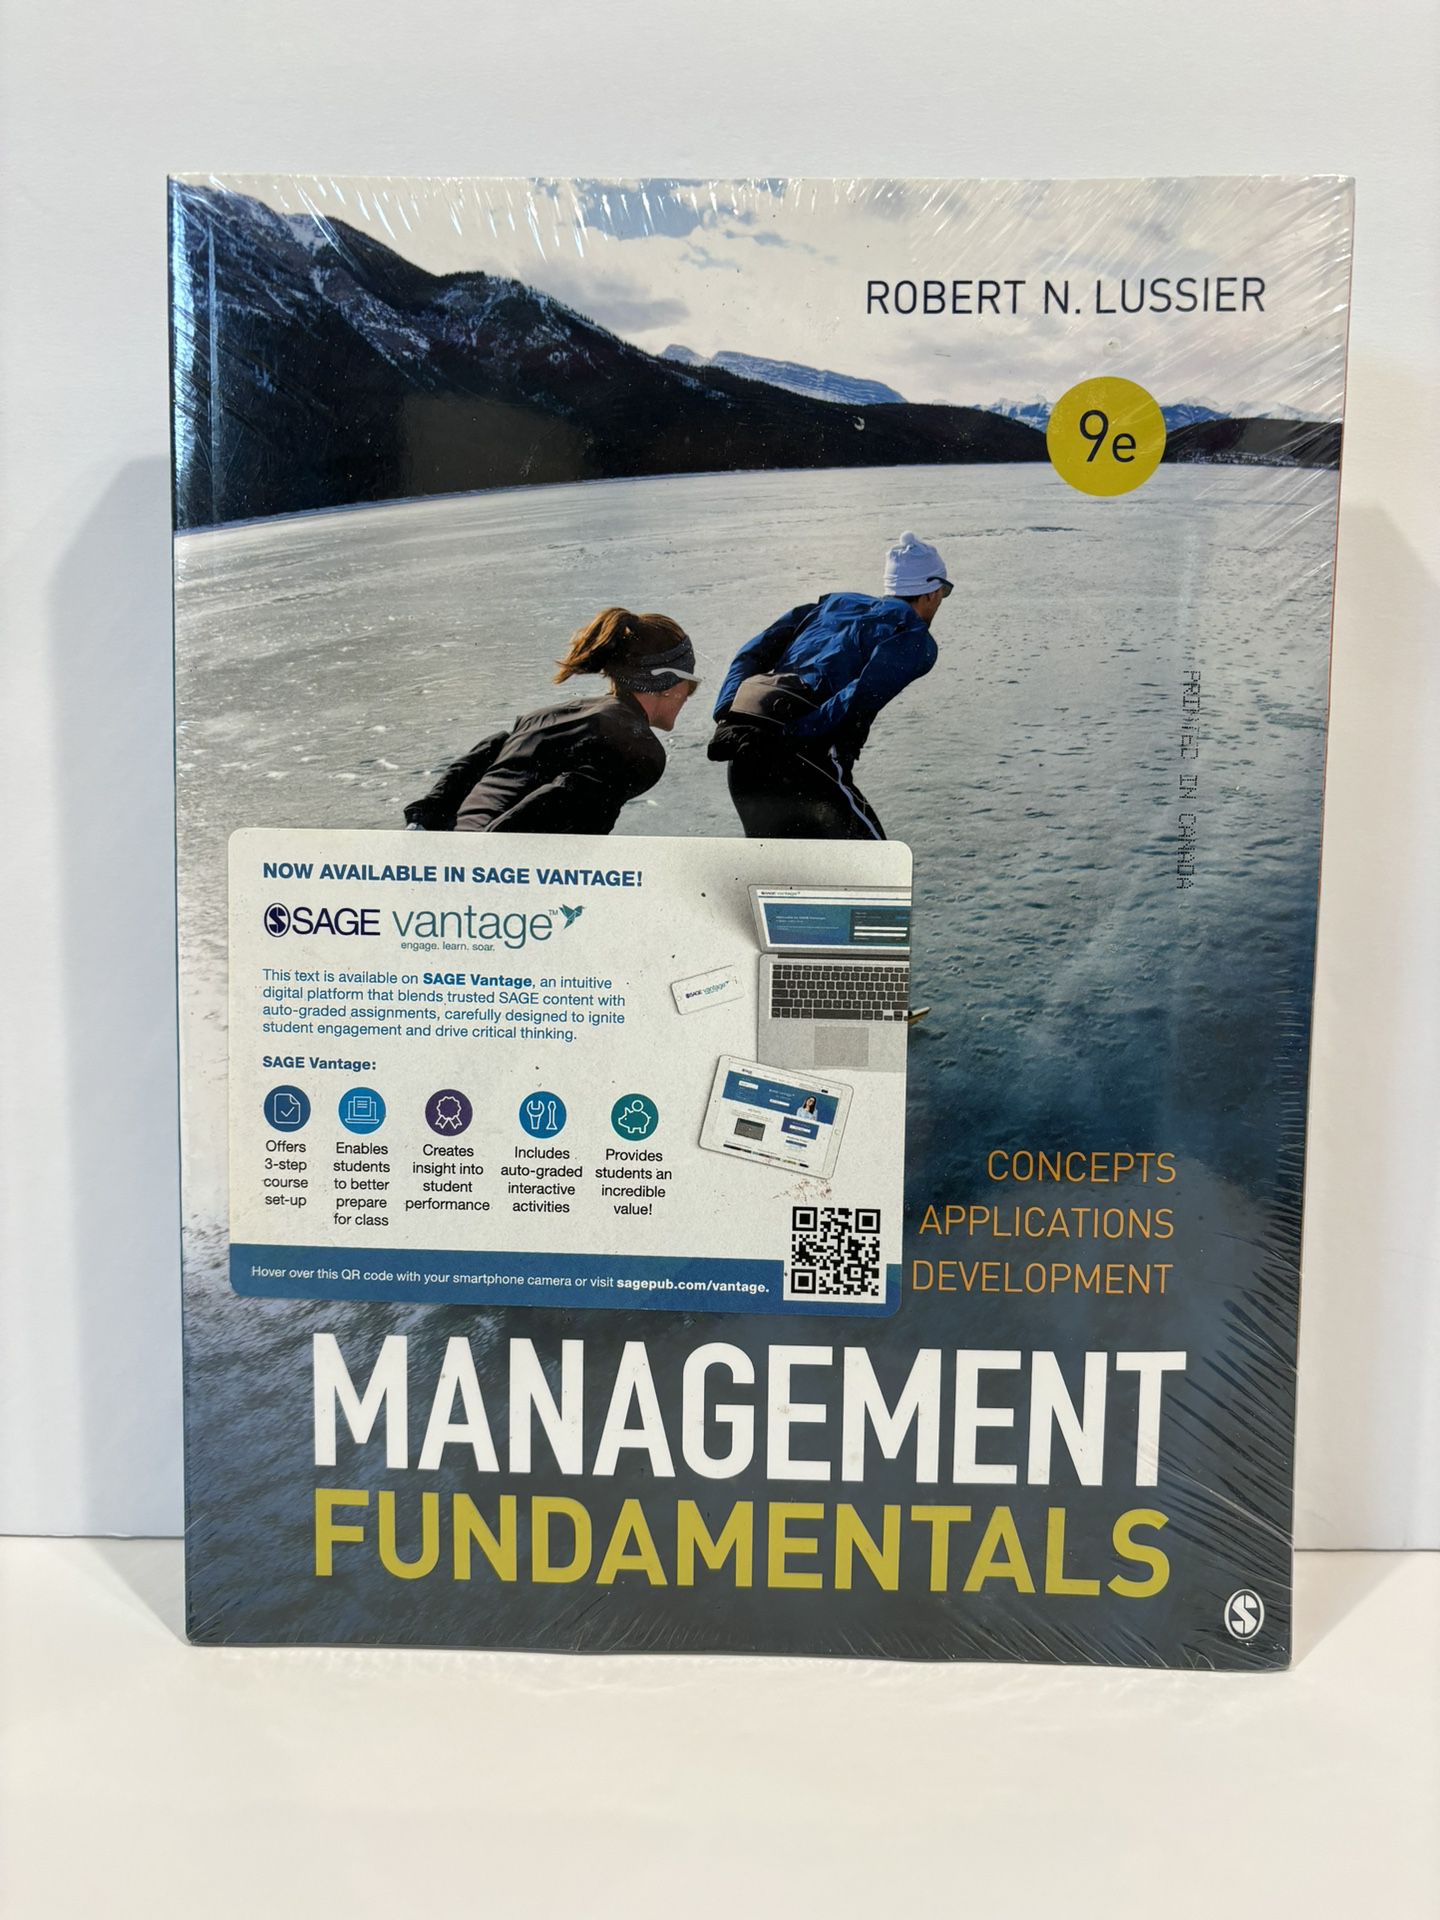 Management Fundamentals: Concepts, Applications, Development by Lussier 9th Ed.